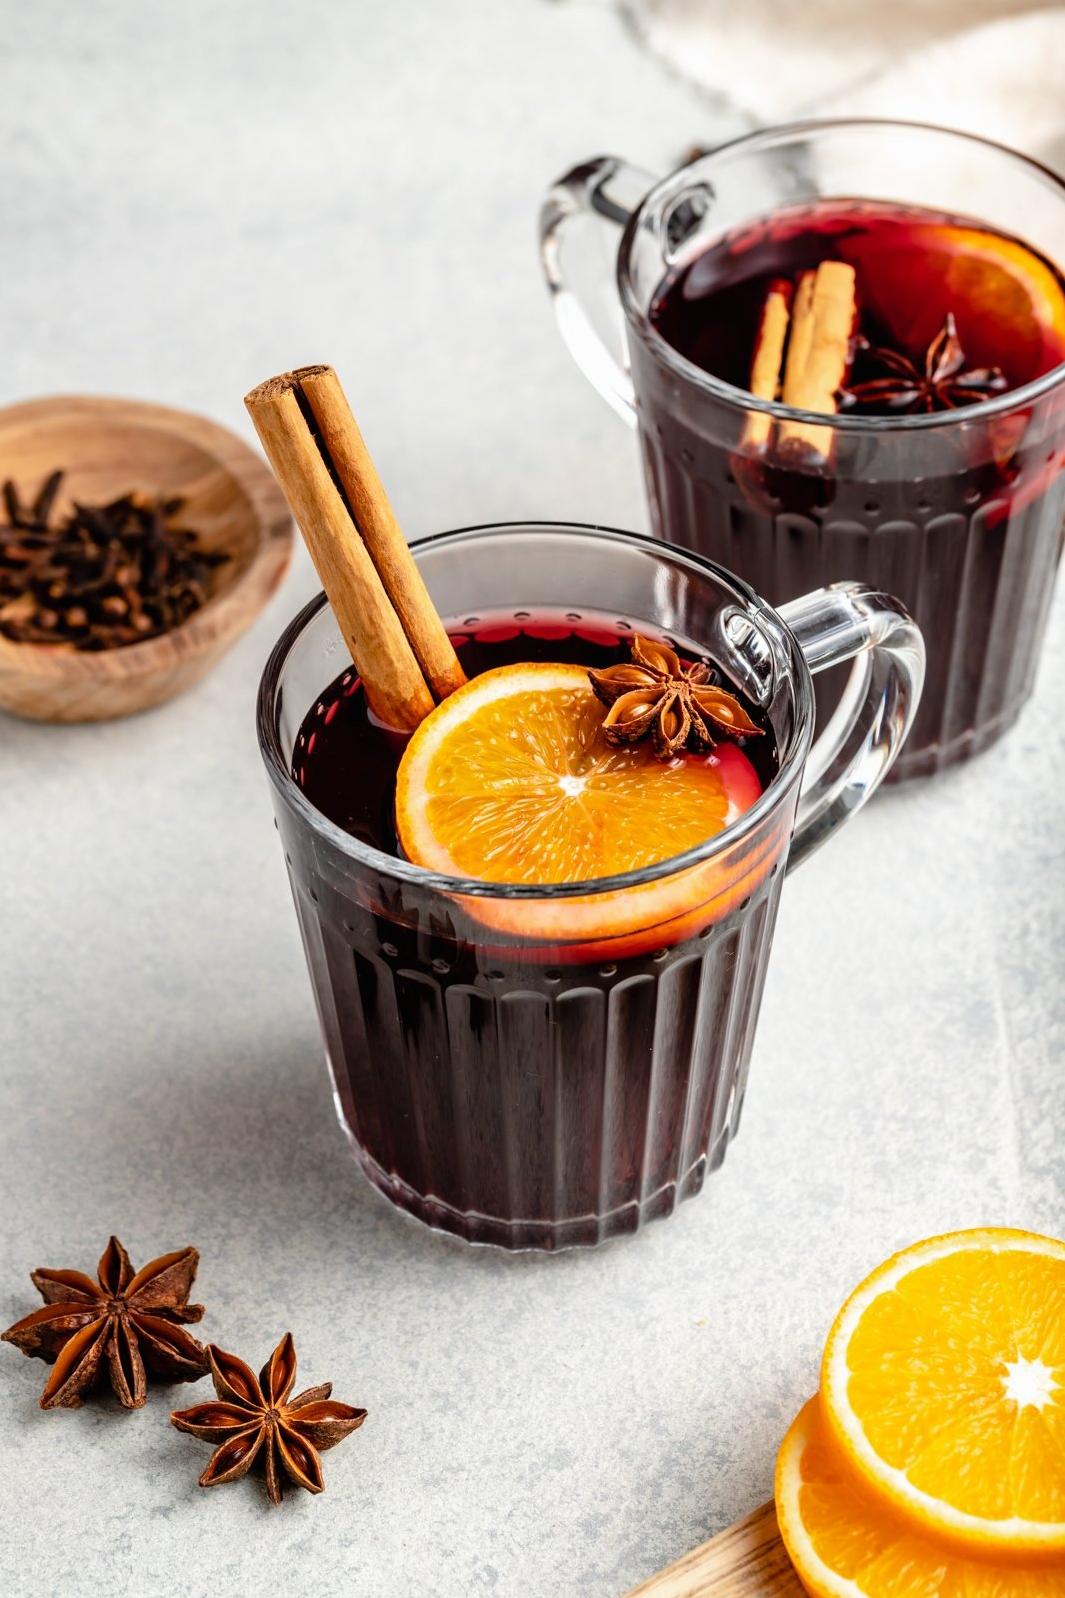  This hot spiced wine is perfect for entertaining!